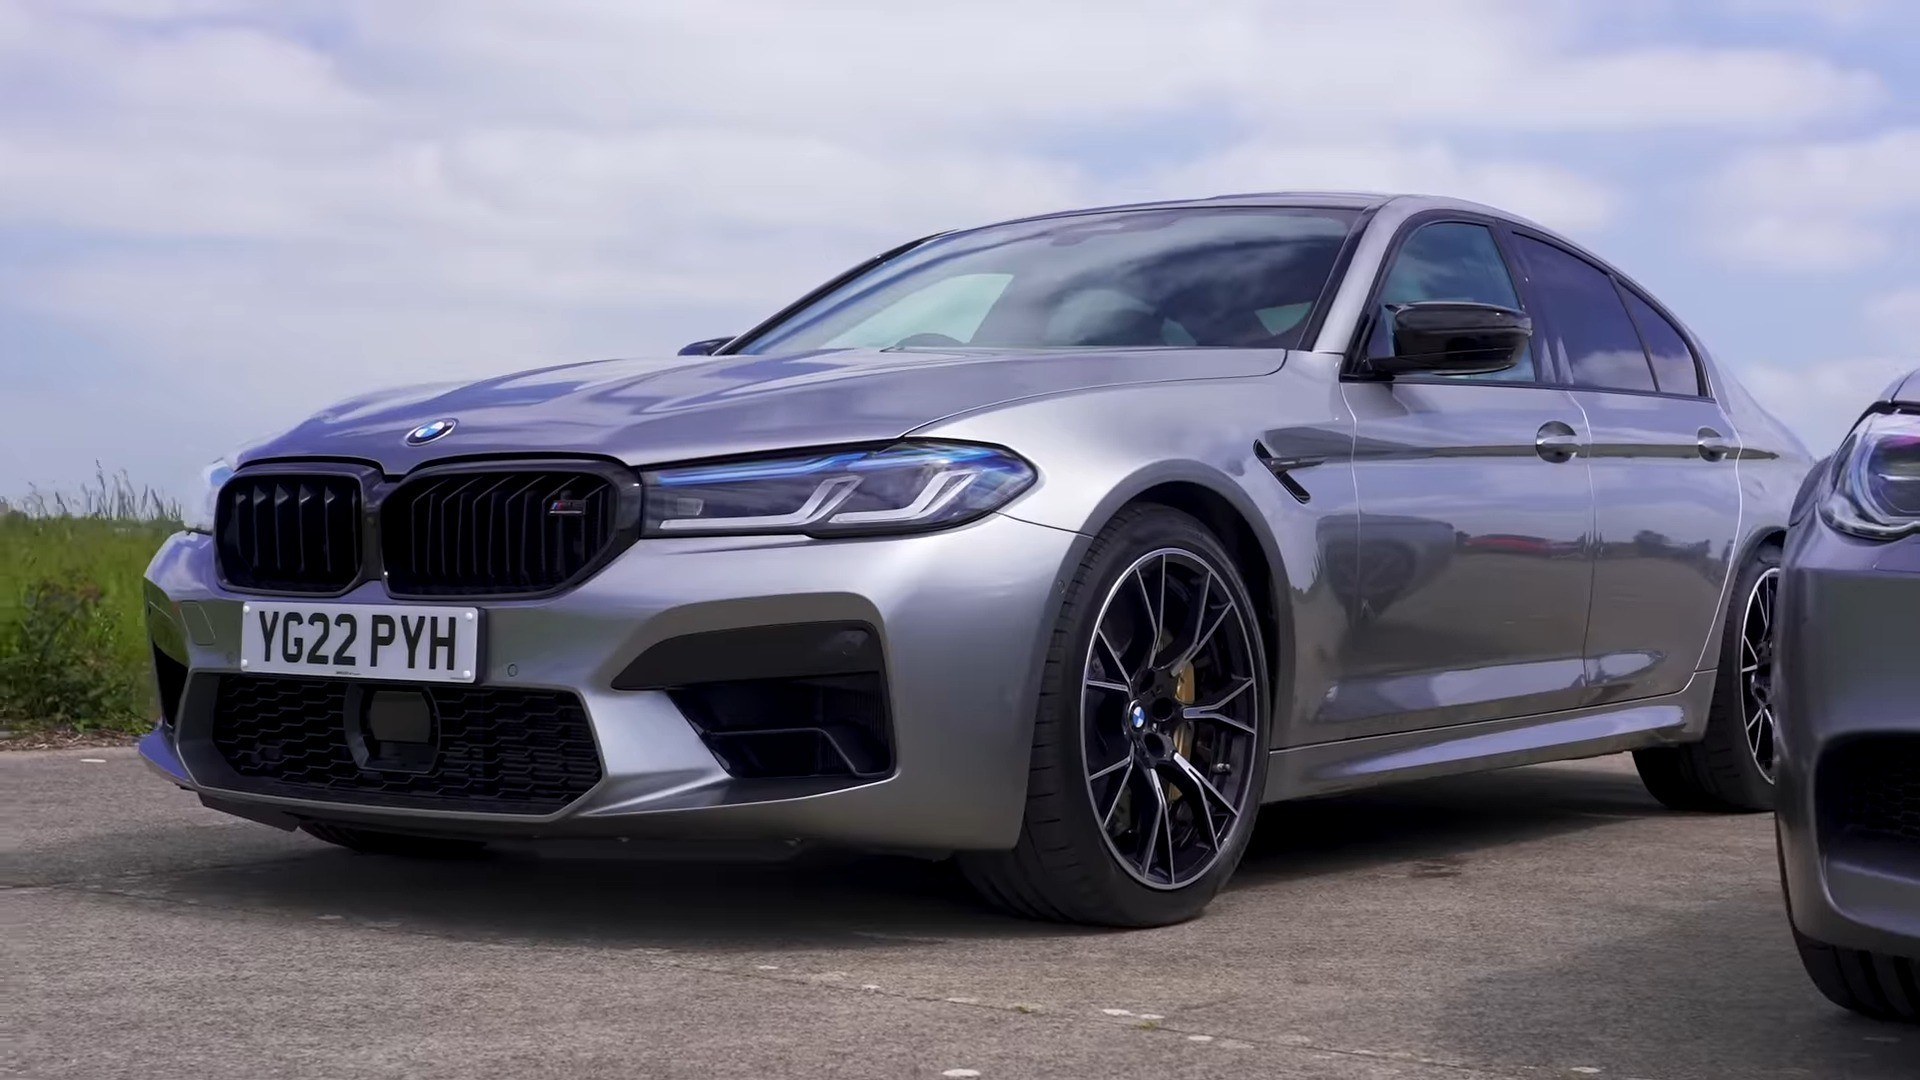 The BMW F10 M5 is the forgotten M car